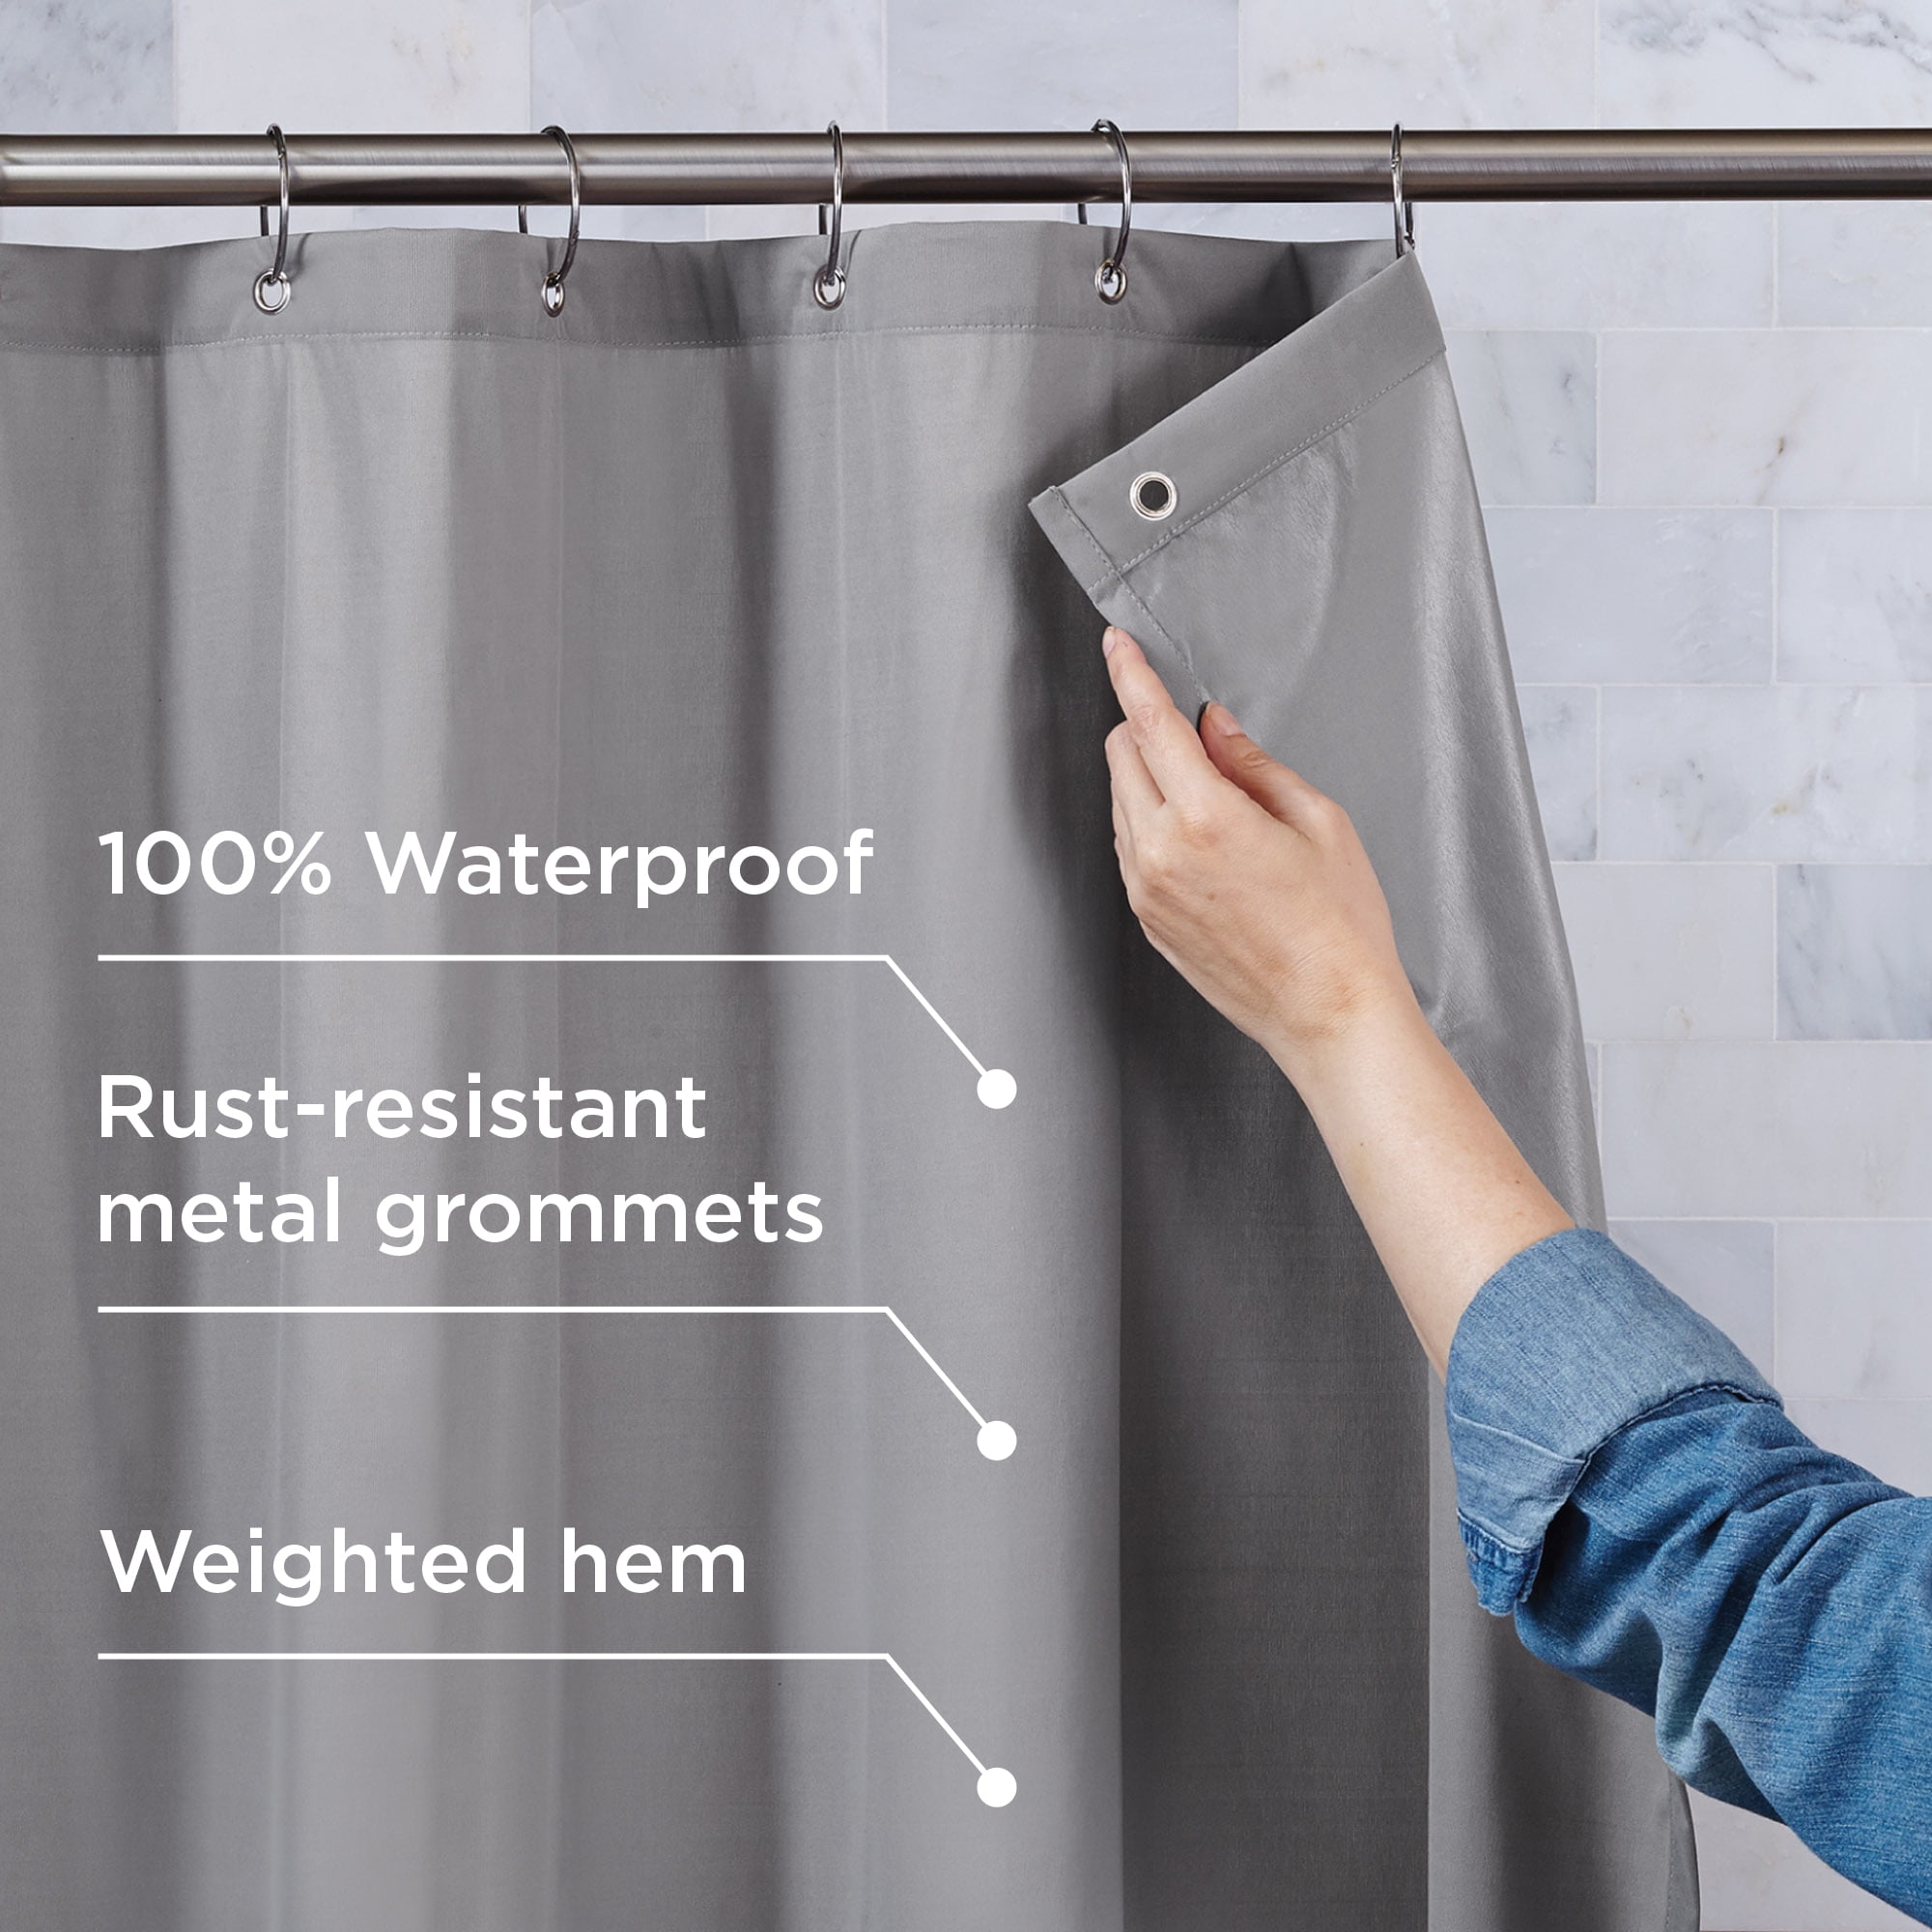 Waterproof Fabric Shower Curtain Or, Do Linen Shower Curtains Need A Liner